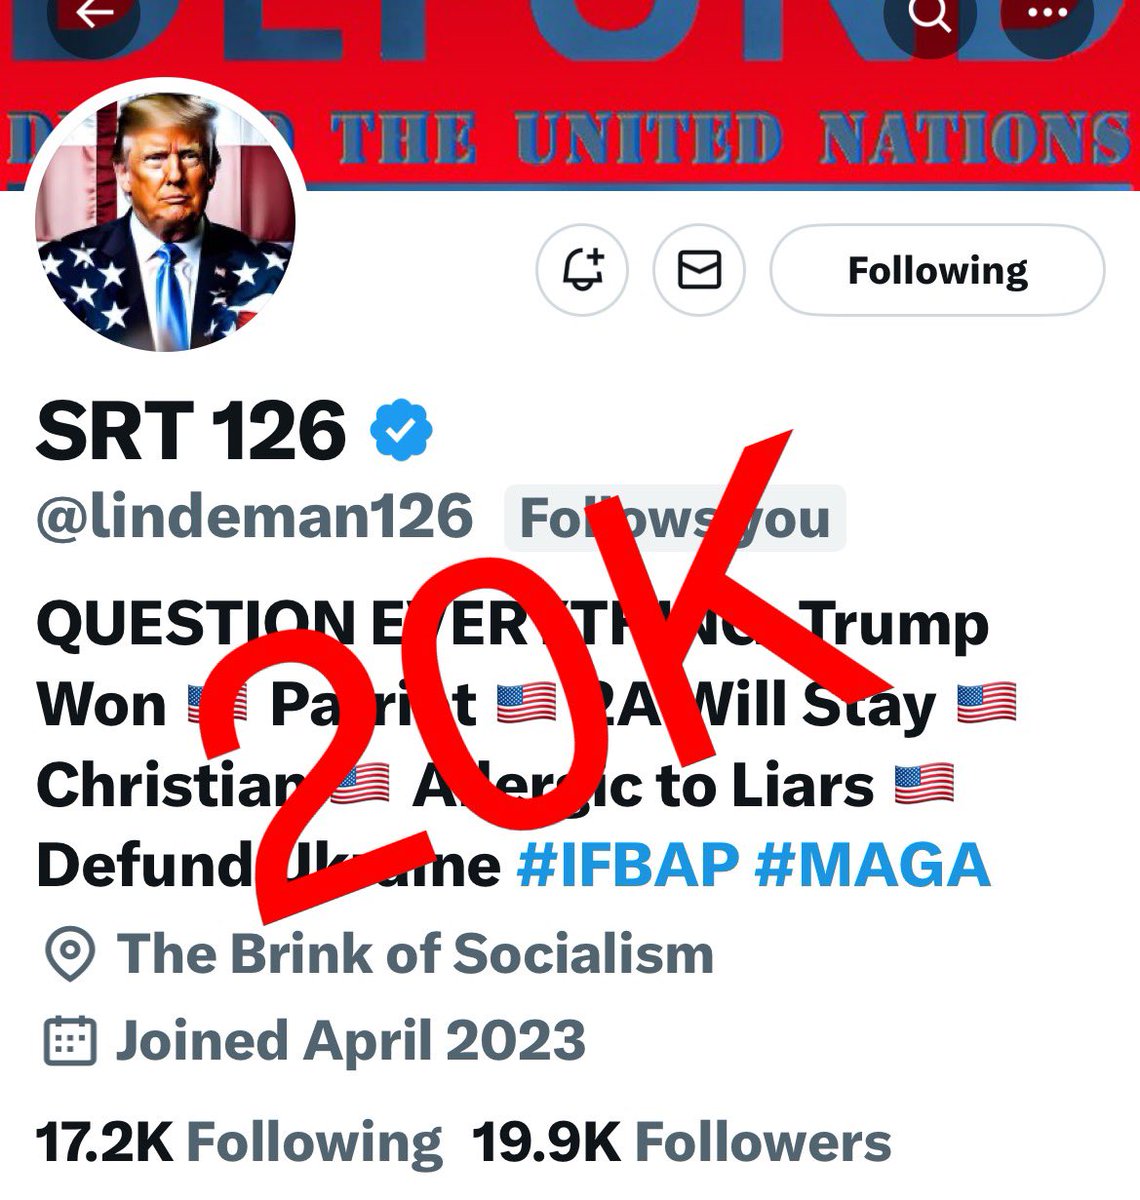 ‼️ Calling on all patriots please give my good friend @Lindeman126 a follow , let’s give him a boost to 20K & beyond. ‼️ he’s an outstanding patriot , ⭐️a great follow!! 🇺🇸❤️🤍💙 Let’s do this 🔥 @Lindeman126